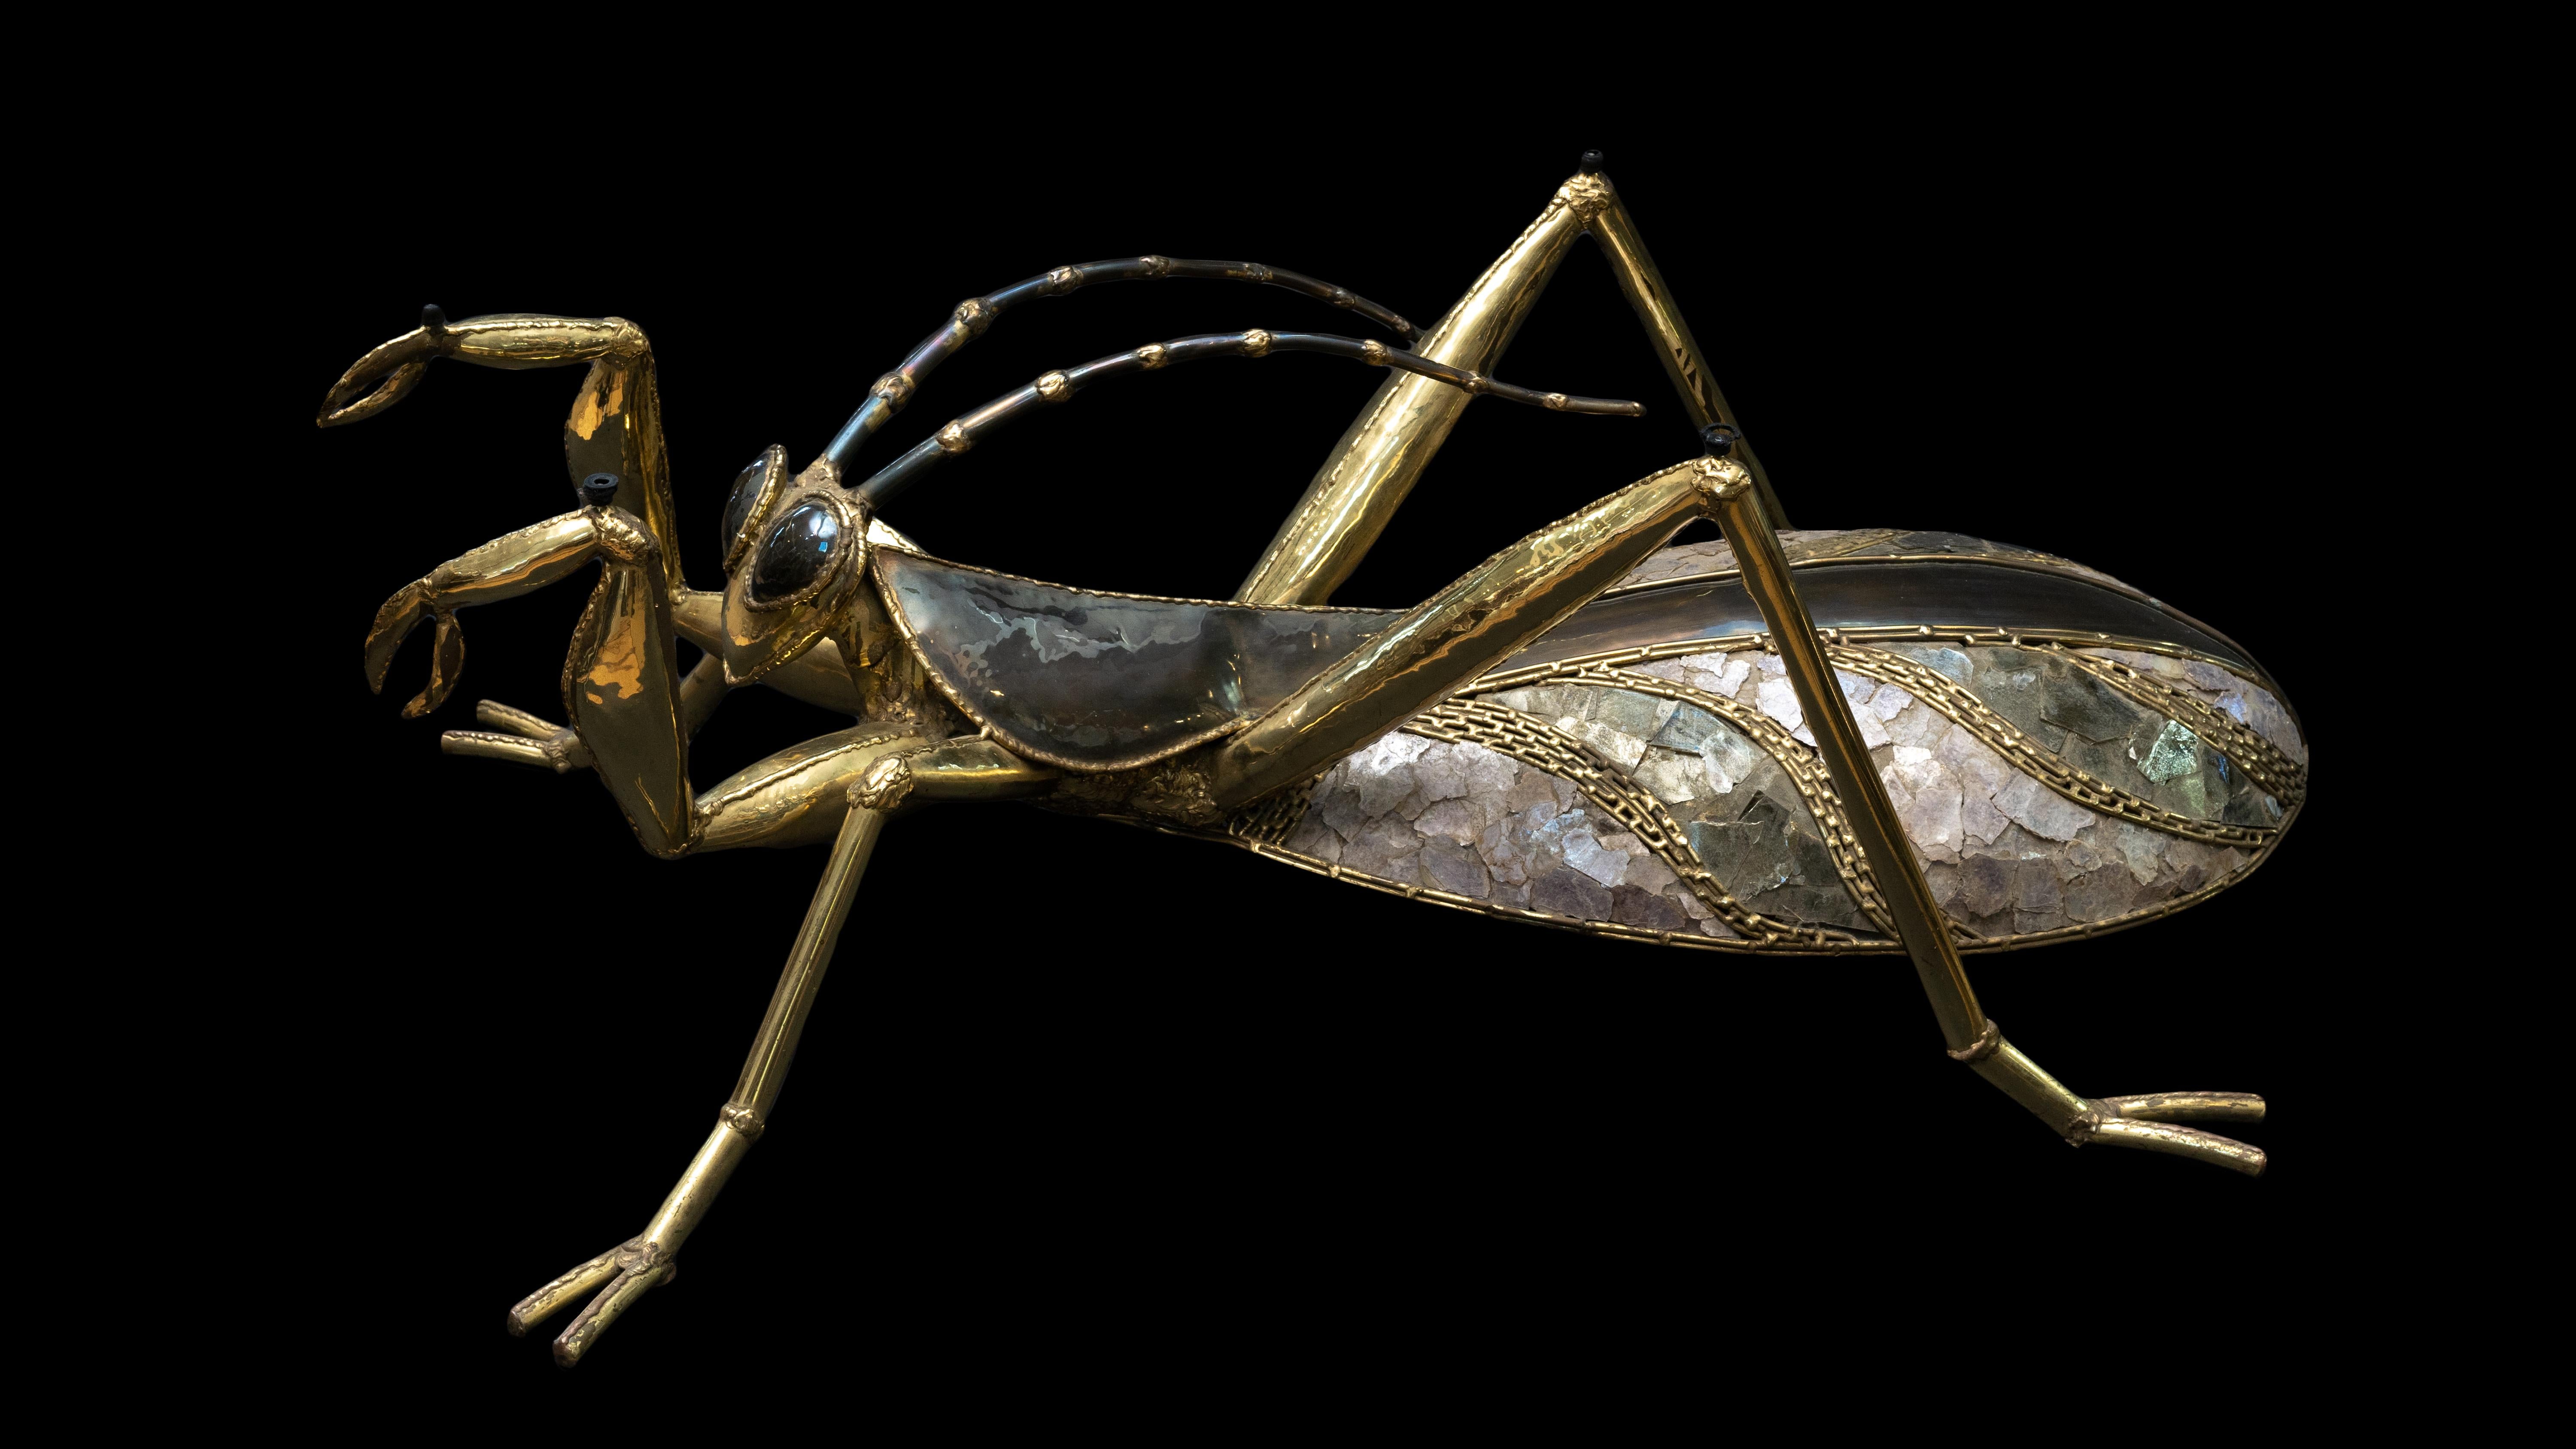 A massive coffee table in form of a Praying Mantis attributed to Jacques Duval Brasseur. The body is made of patinated brass, combination of lighter and darker mica wings and a smoky glass top. The wings are illuminated from within to give a